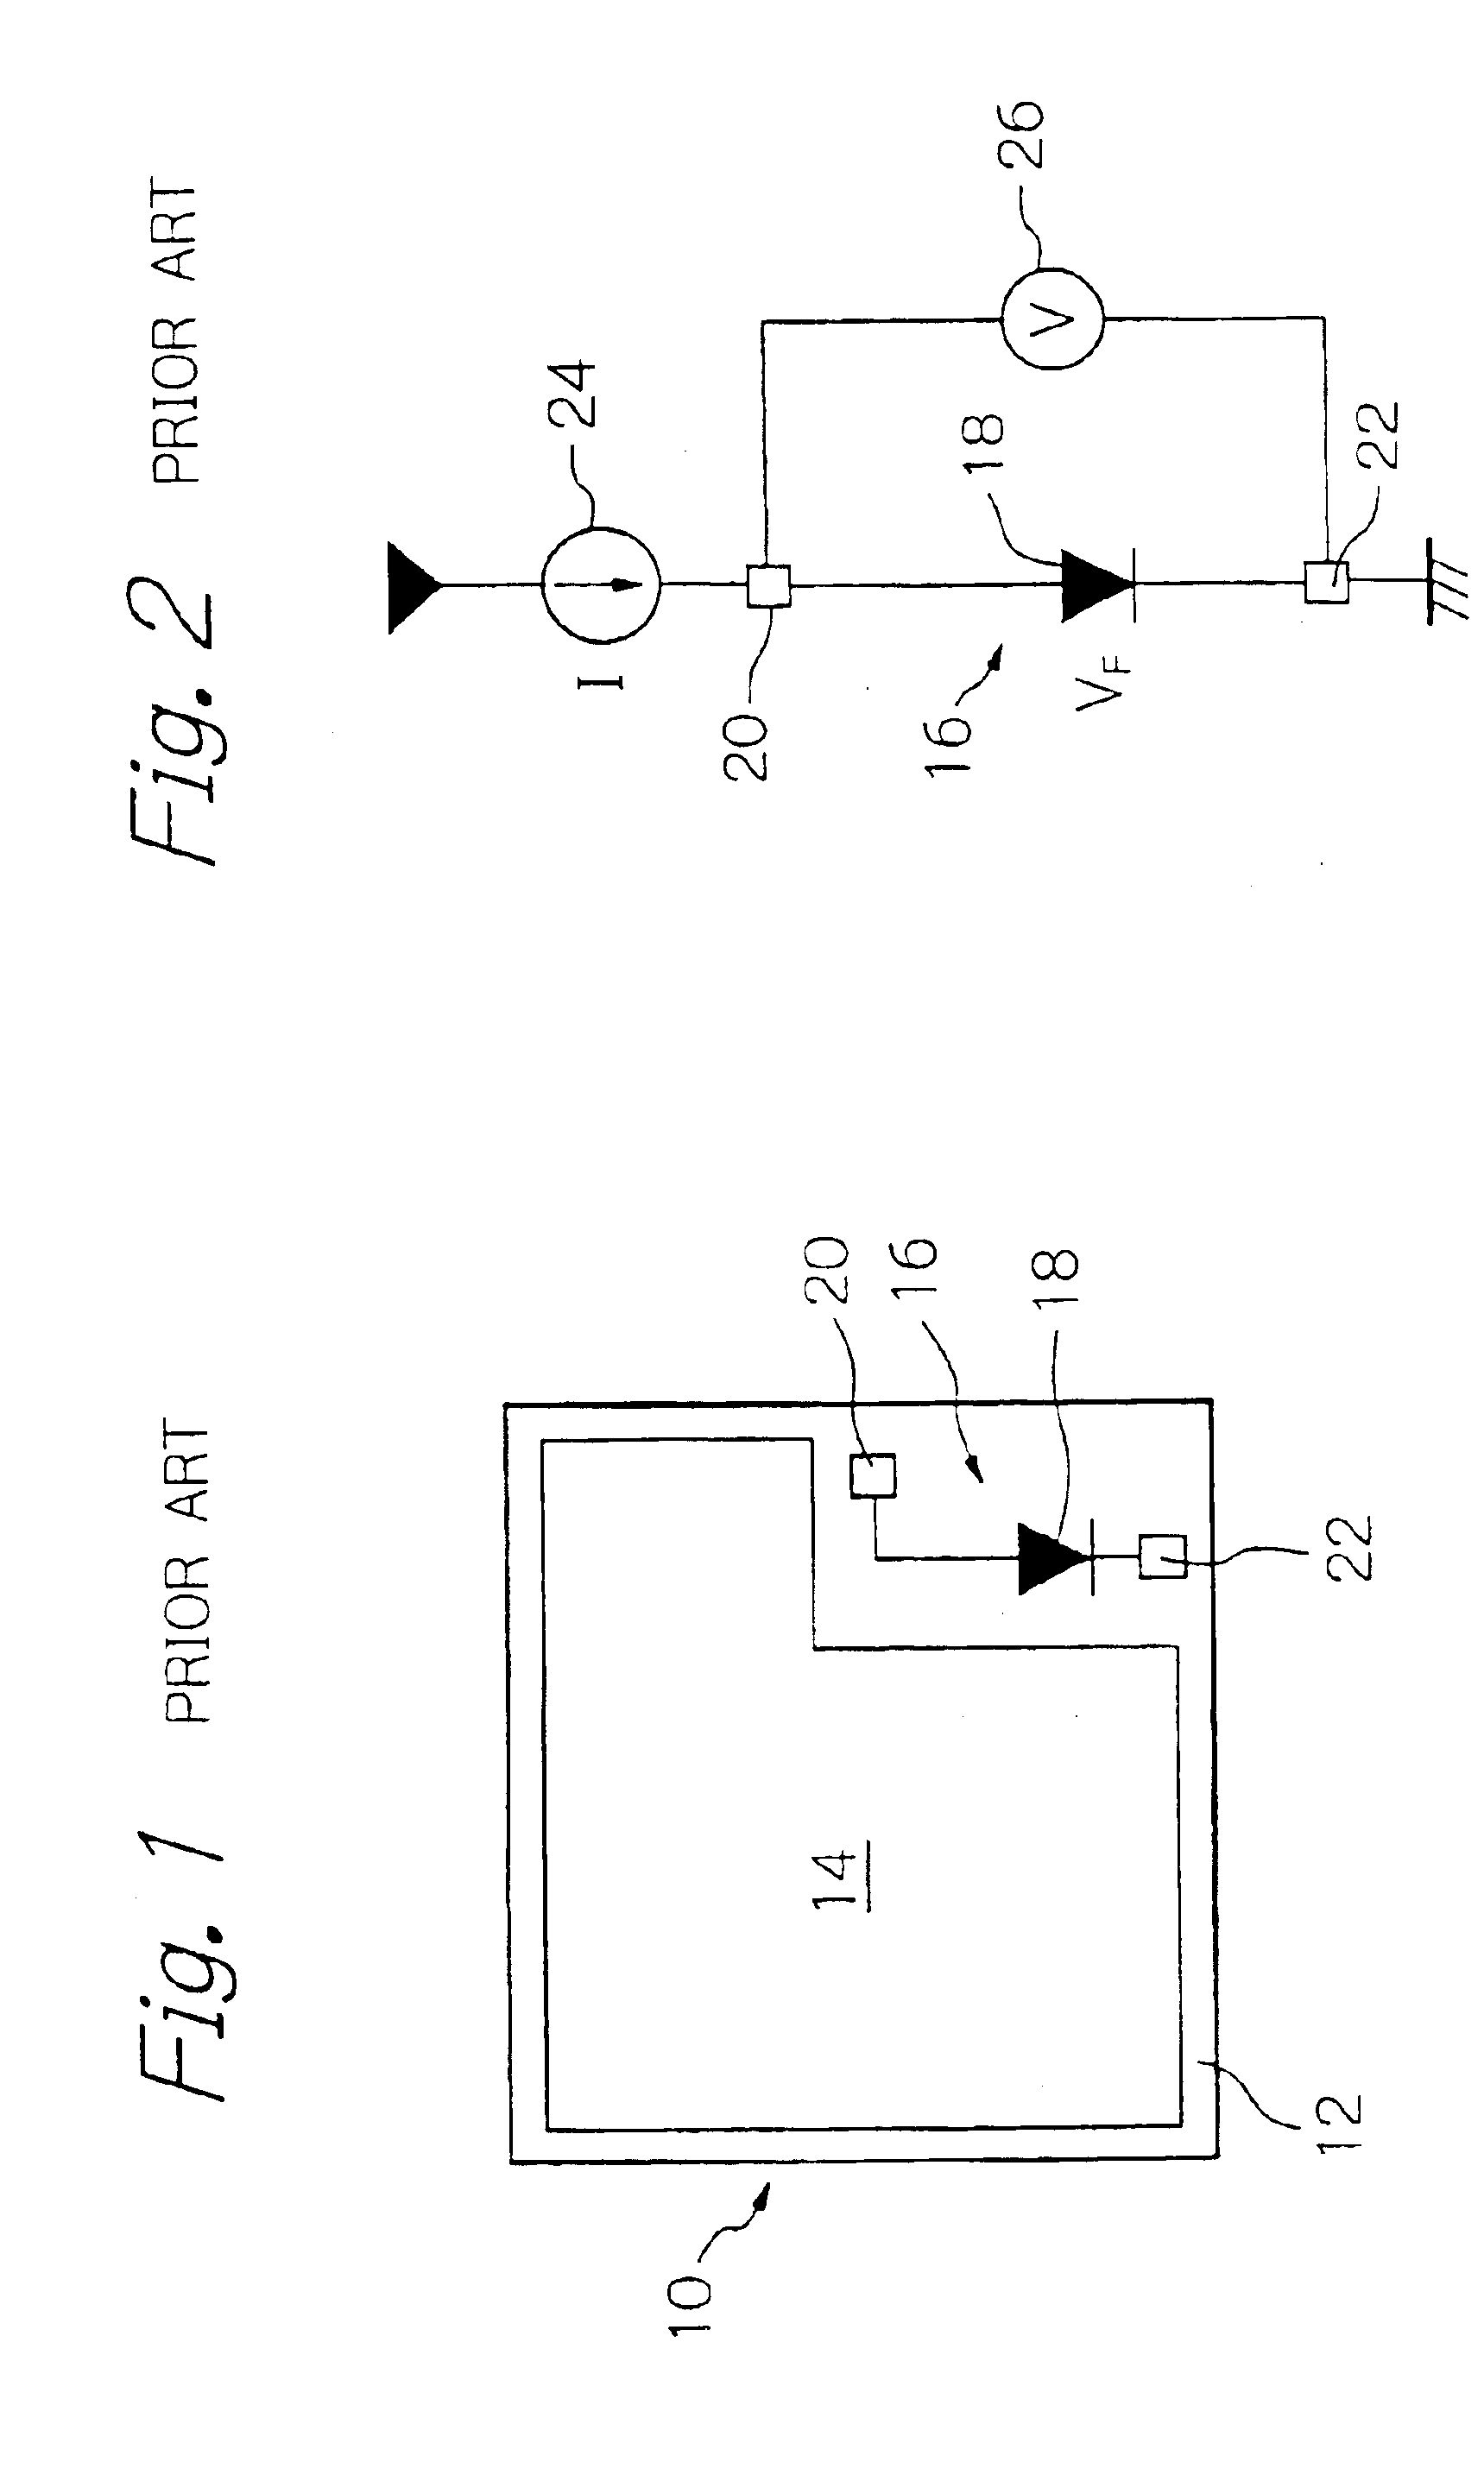 Temperature measuring sensor incorporated in semiconductor substrate, and semiconductor device containing such temperature measuring sensor